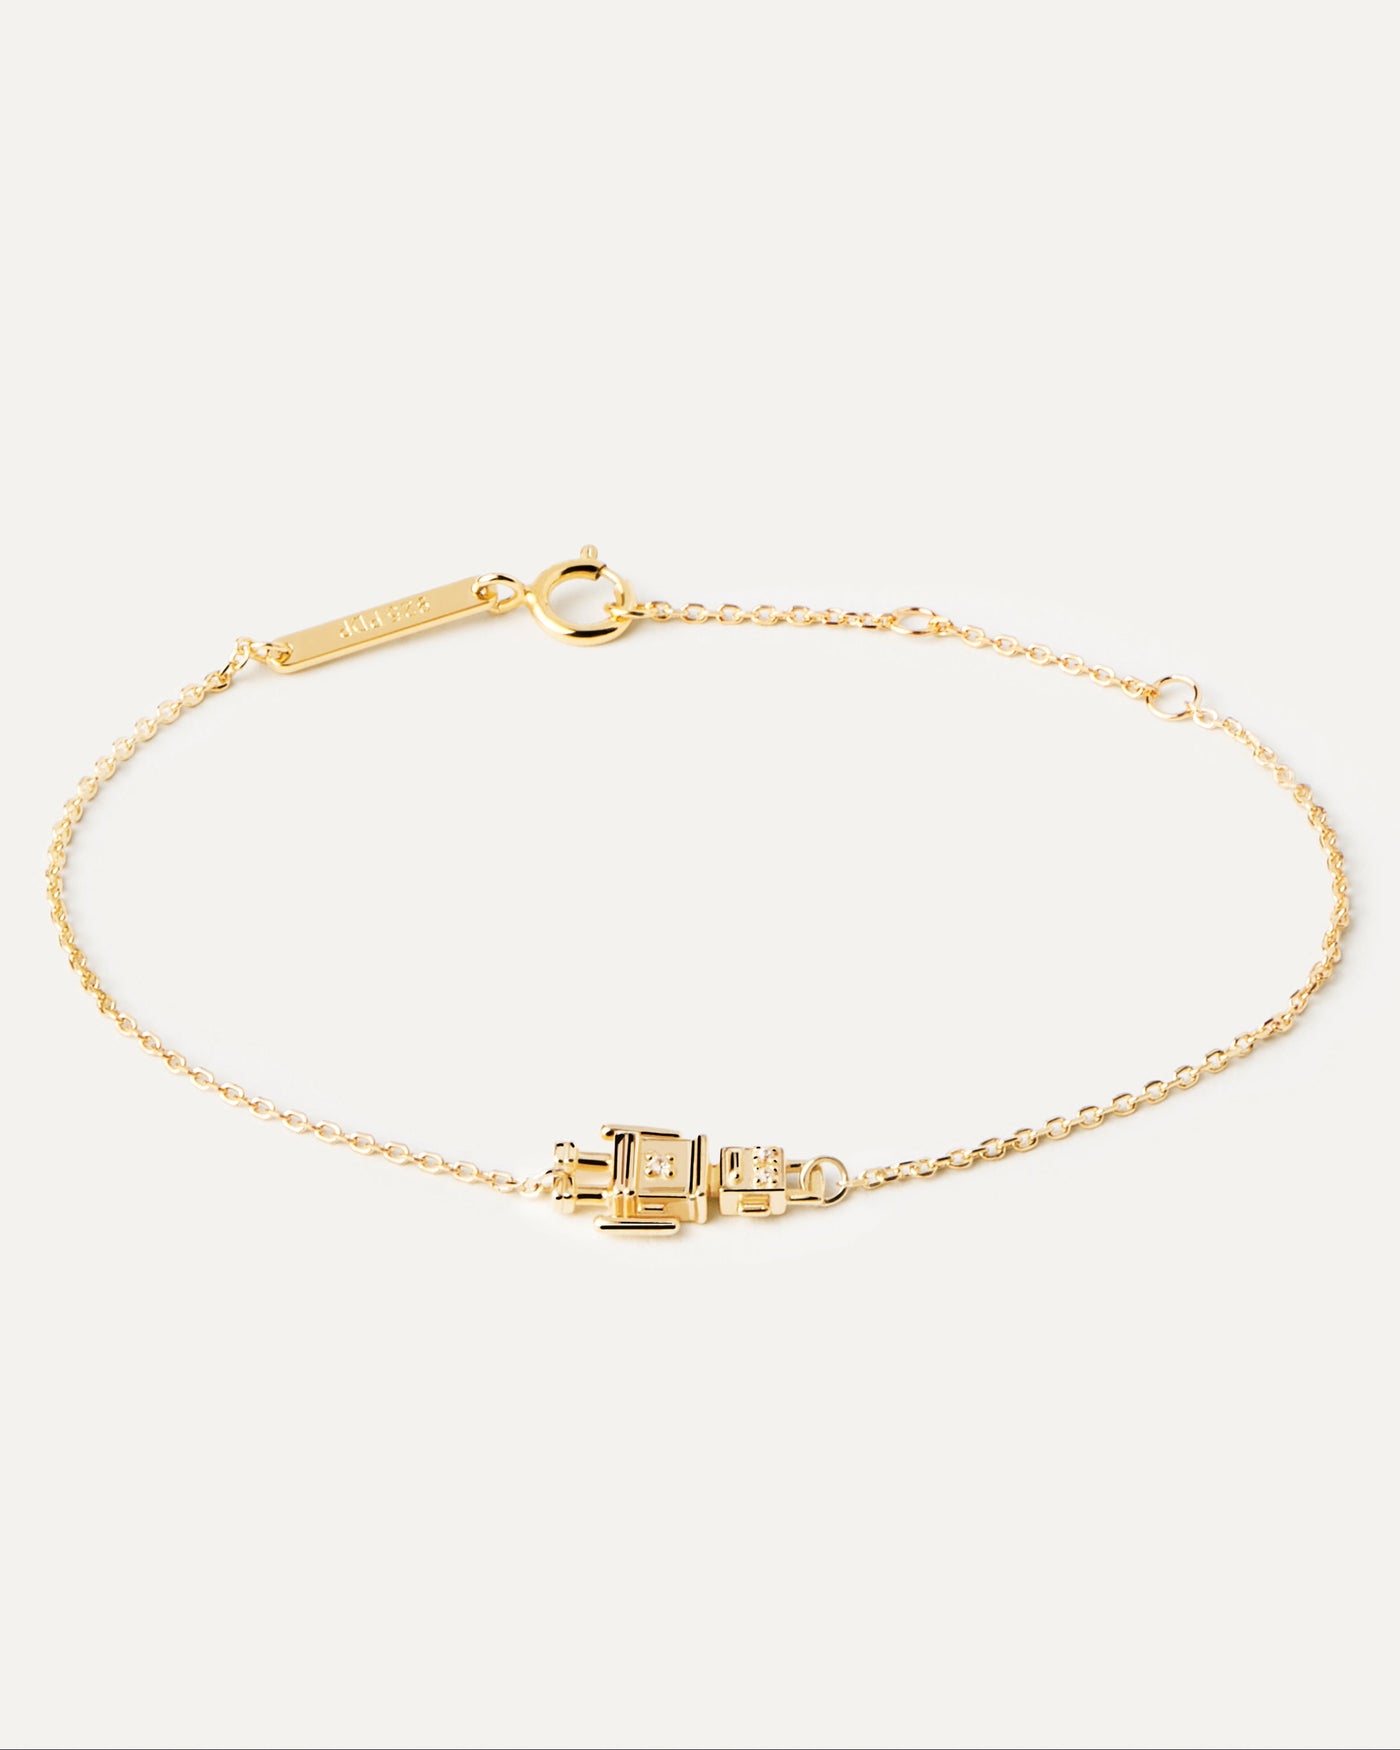 2023 Selection | Robert Bracelet. Dainty gold-plated silver bracelet with a robot motive. Get the latest arrival from PDPAOLA. Place your order safely and get this Best Seller. Free Shipping.